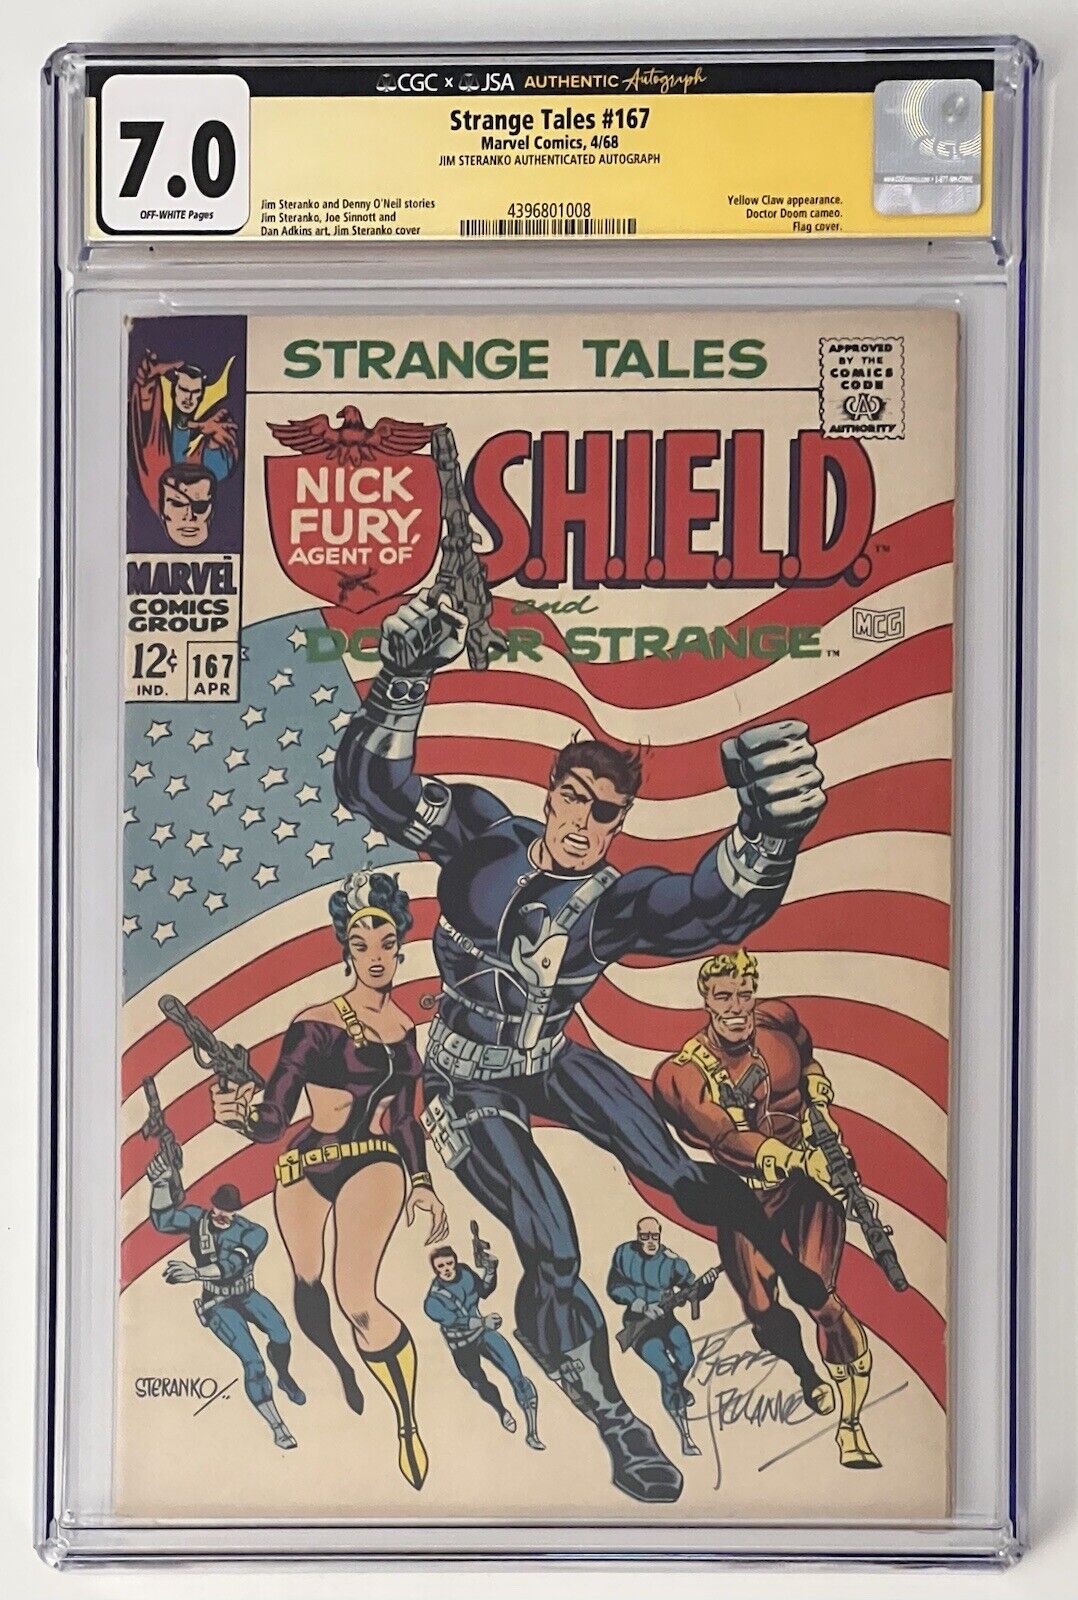 Strange Tales #167 (1968) - CGC 7.0 OW - Signed by Steranko (JSA Authenticated)